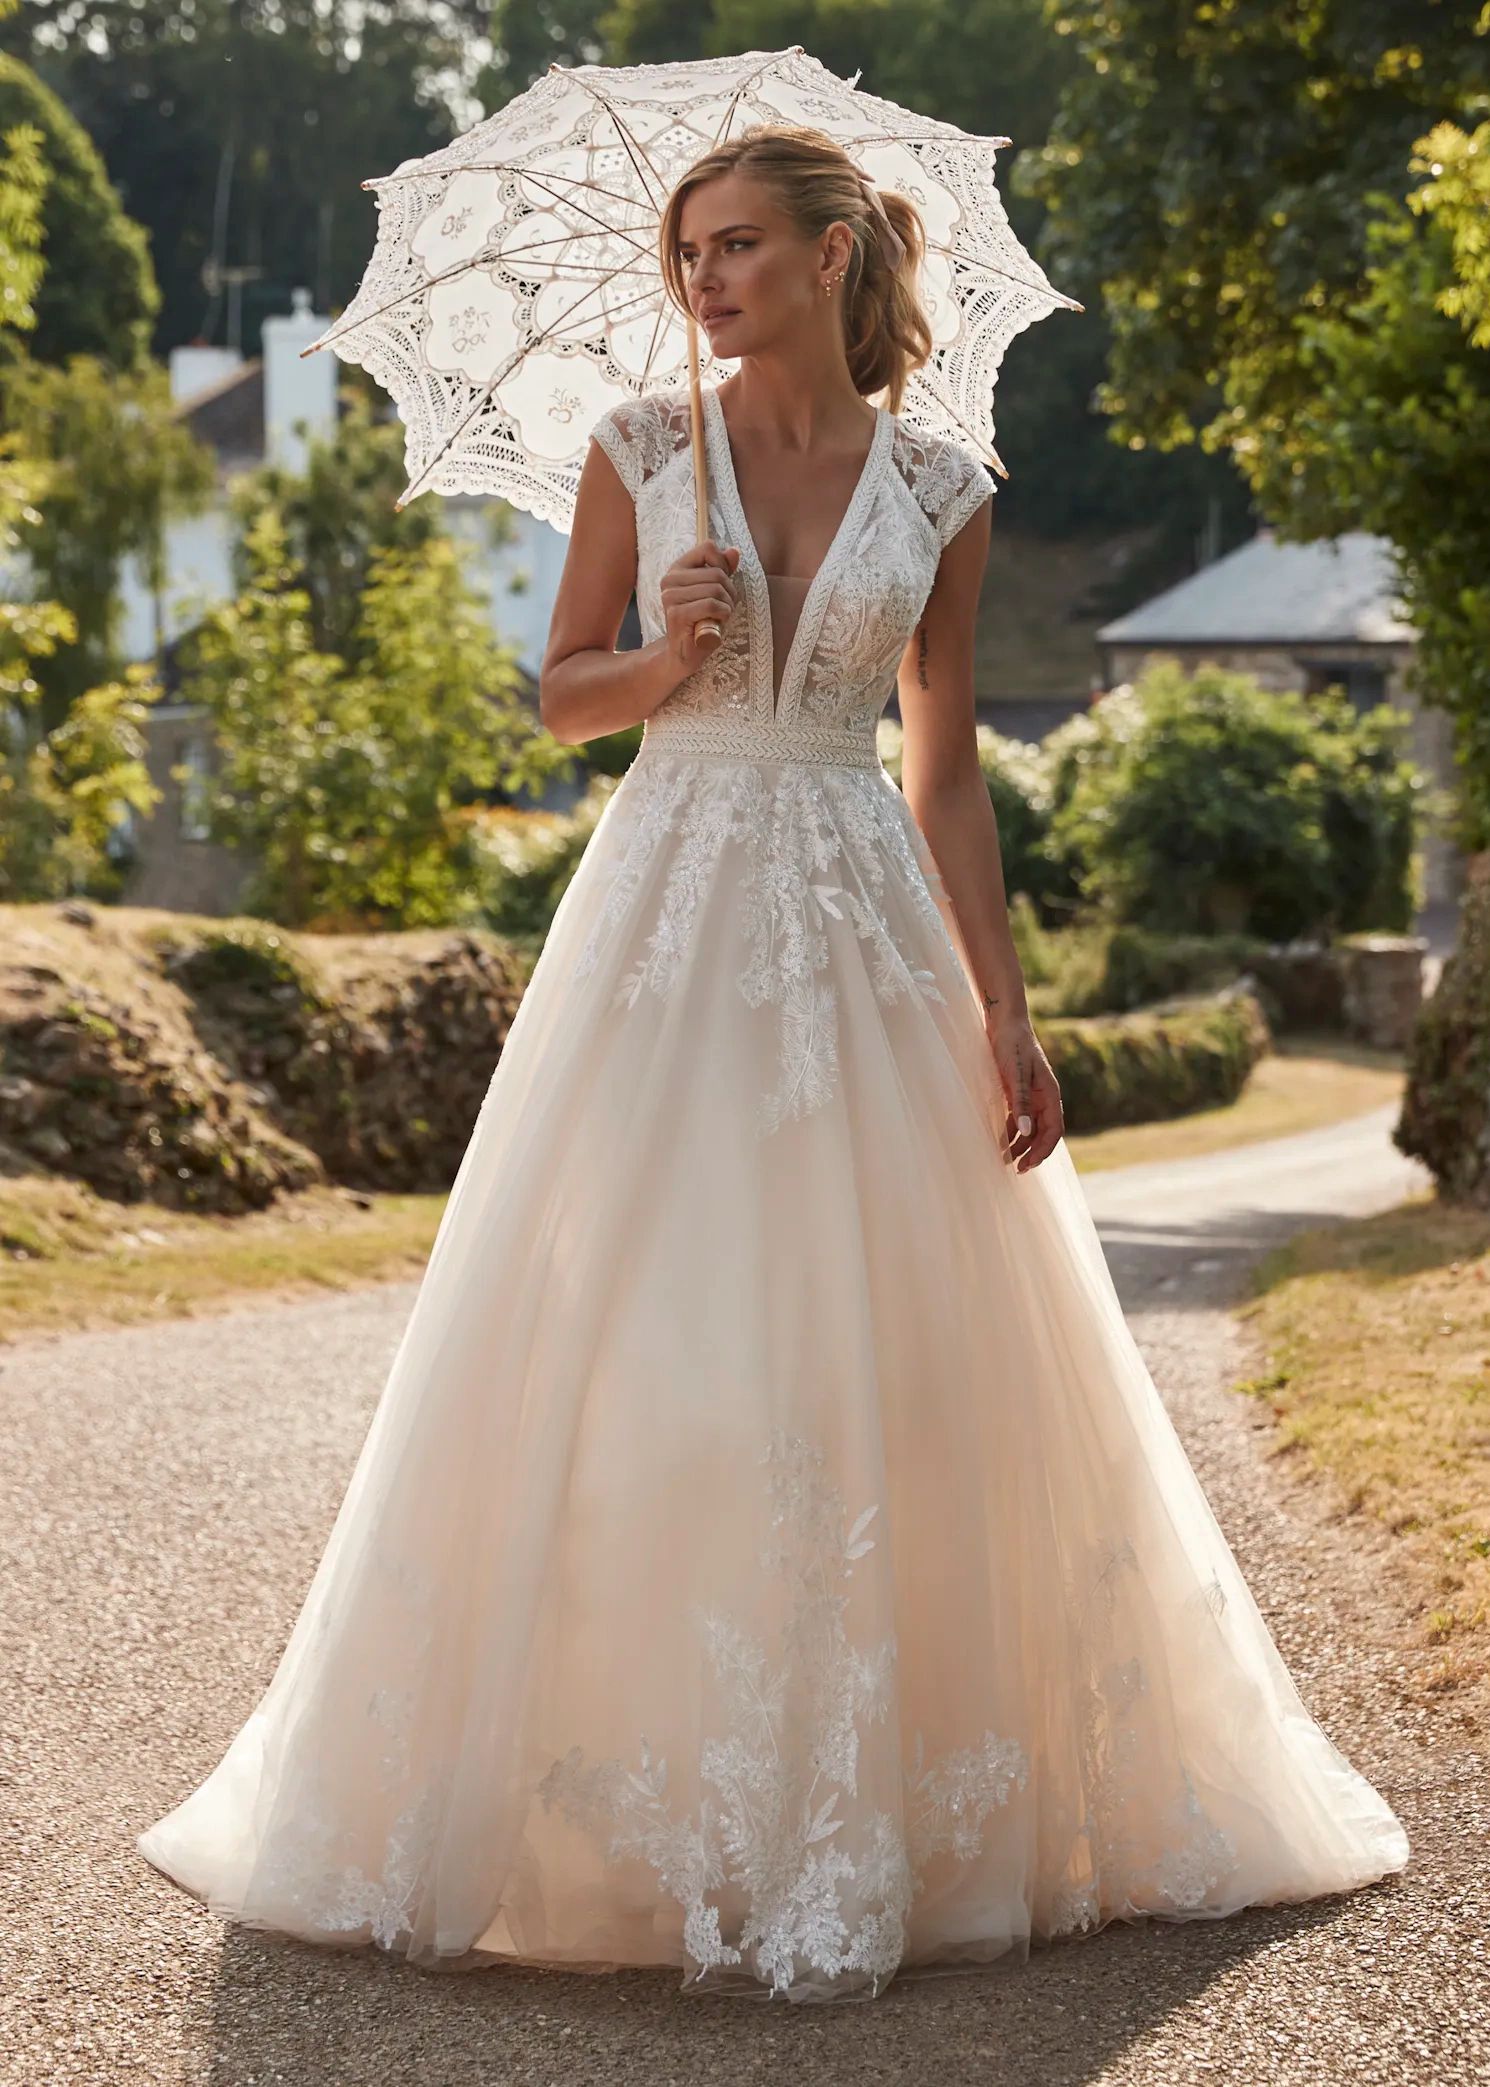 JW220929
A one of a kind tulle and lace A-line dress with a plunging neckline. Shown in Champagne